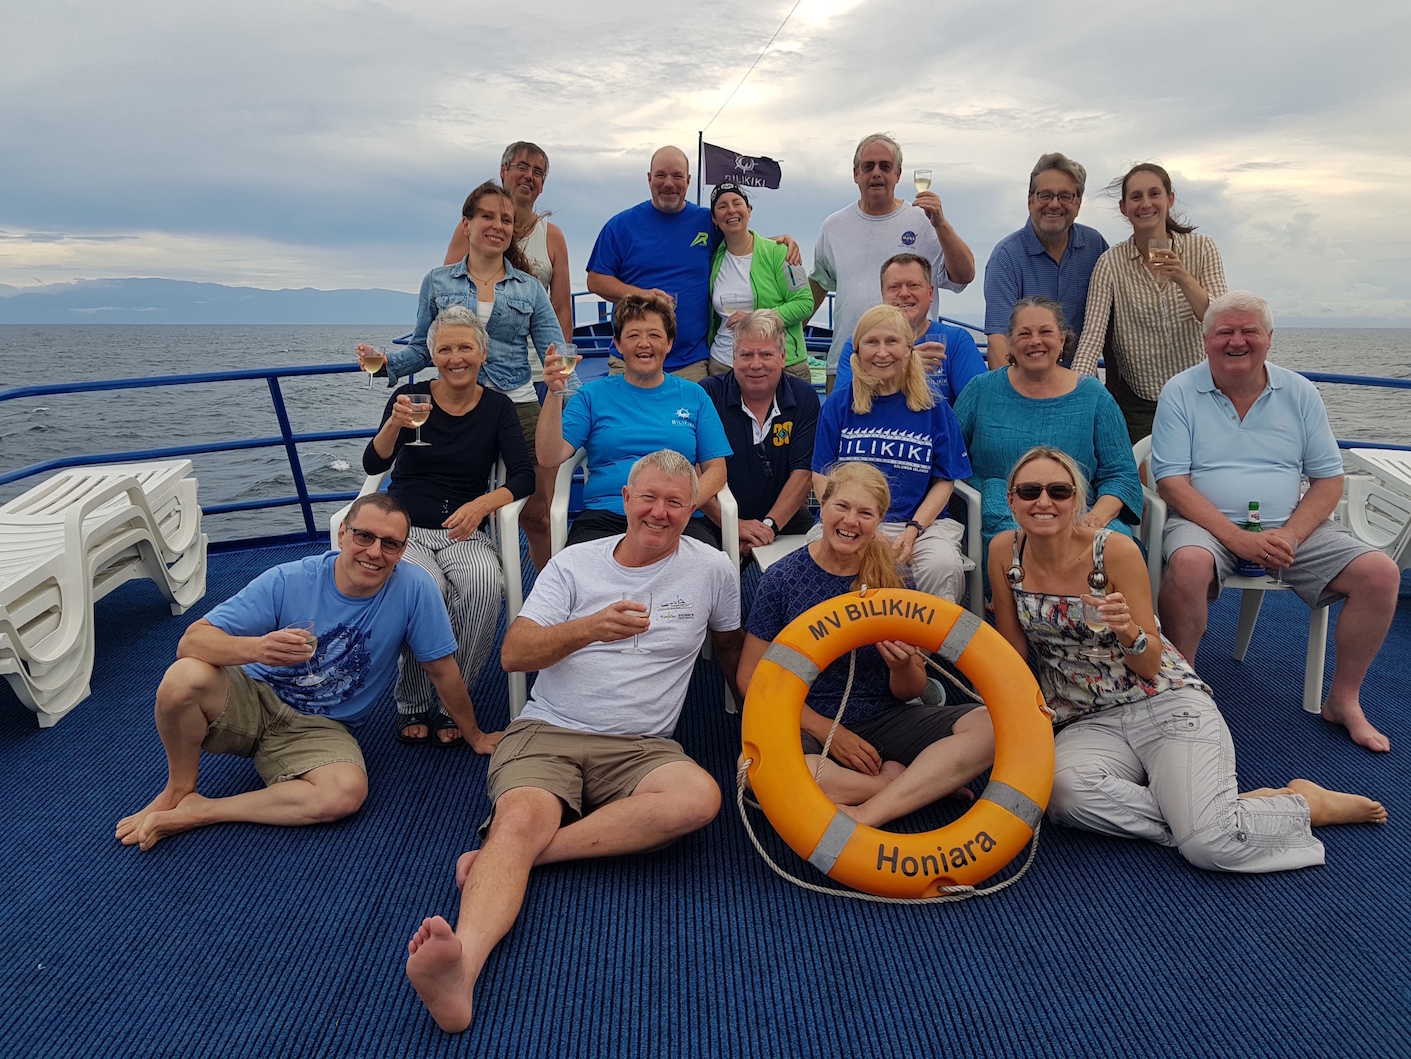 Group photo of the divers onboard the Bilikiki in the Solomon Islands